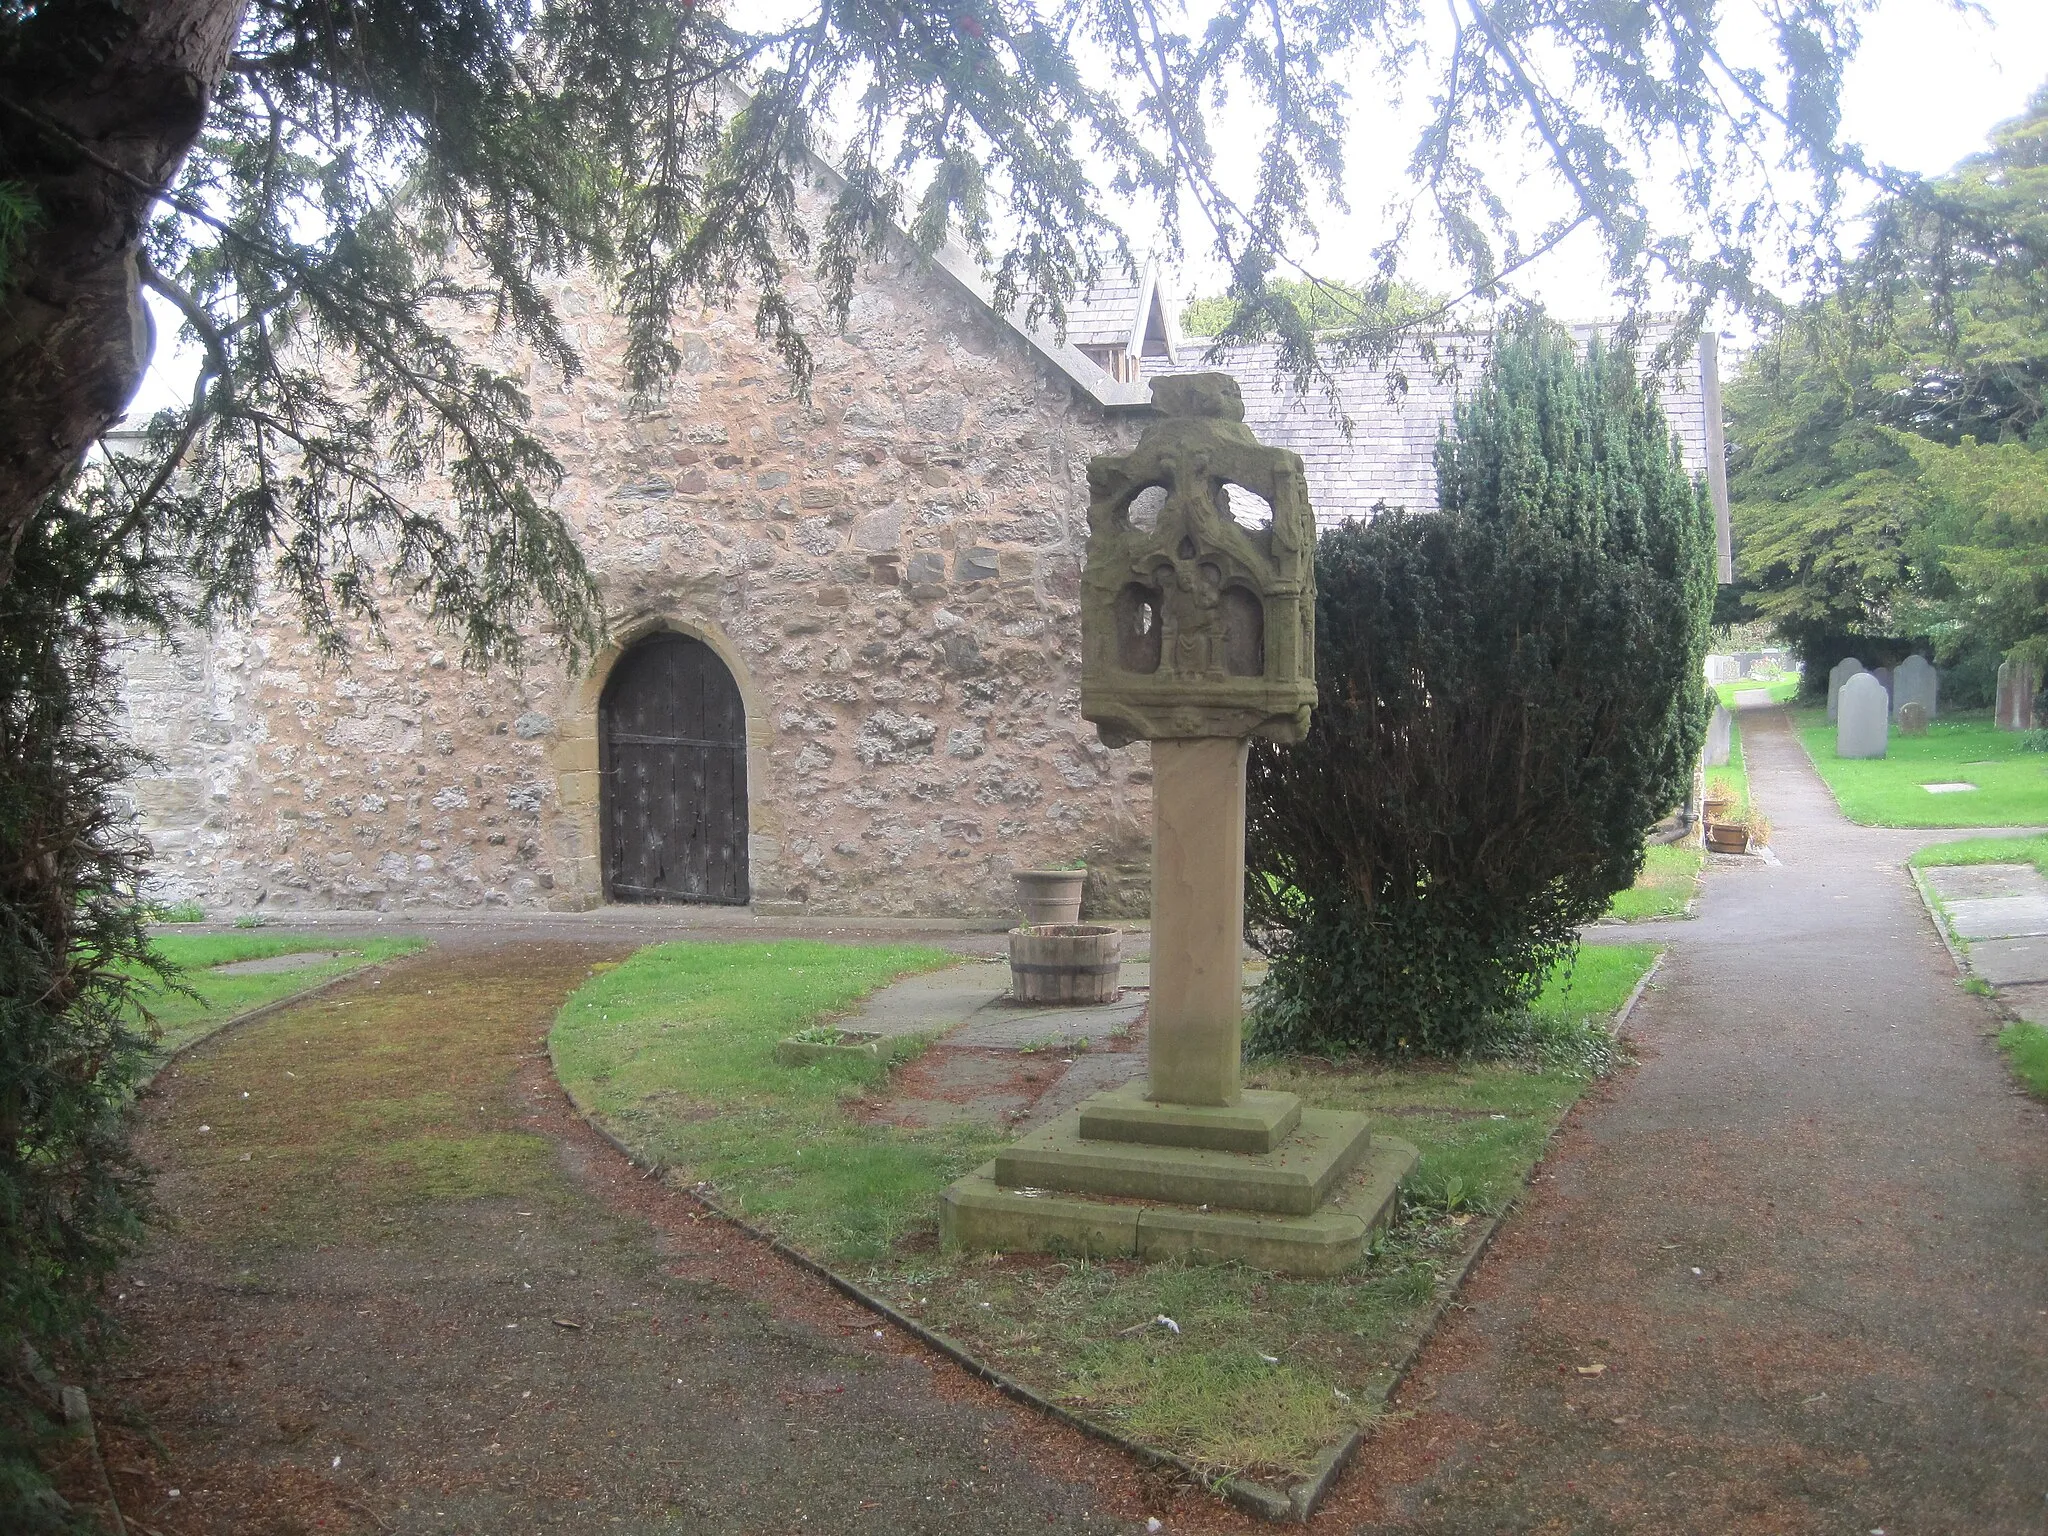 Photo showing: "Pilgrim's Cross", described in 1416 by Welsh language poet Gruffydd ab Ieuan ap Llywelyn Fychan of Llanerch.
Corpus Christi, Tremeirchion, Denbighshire - a Grade II* 14th century church, between the village school and the inn, has an 800 year old yew tree, and was renowned for a wonder-working cross: dating mainly from the 14th and 15th centuries. Has a mail-clad knight of about 1280 carved from stone.